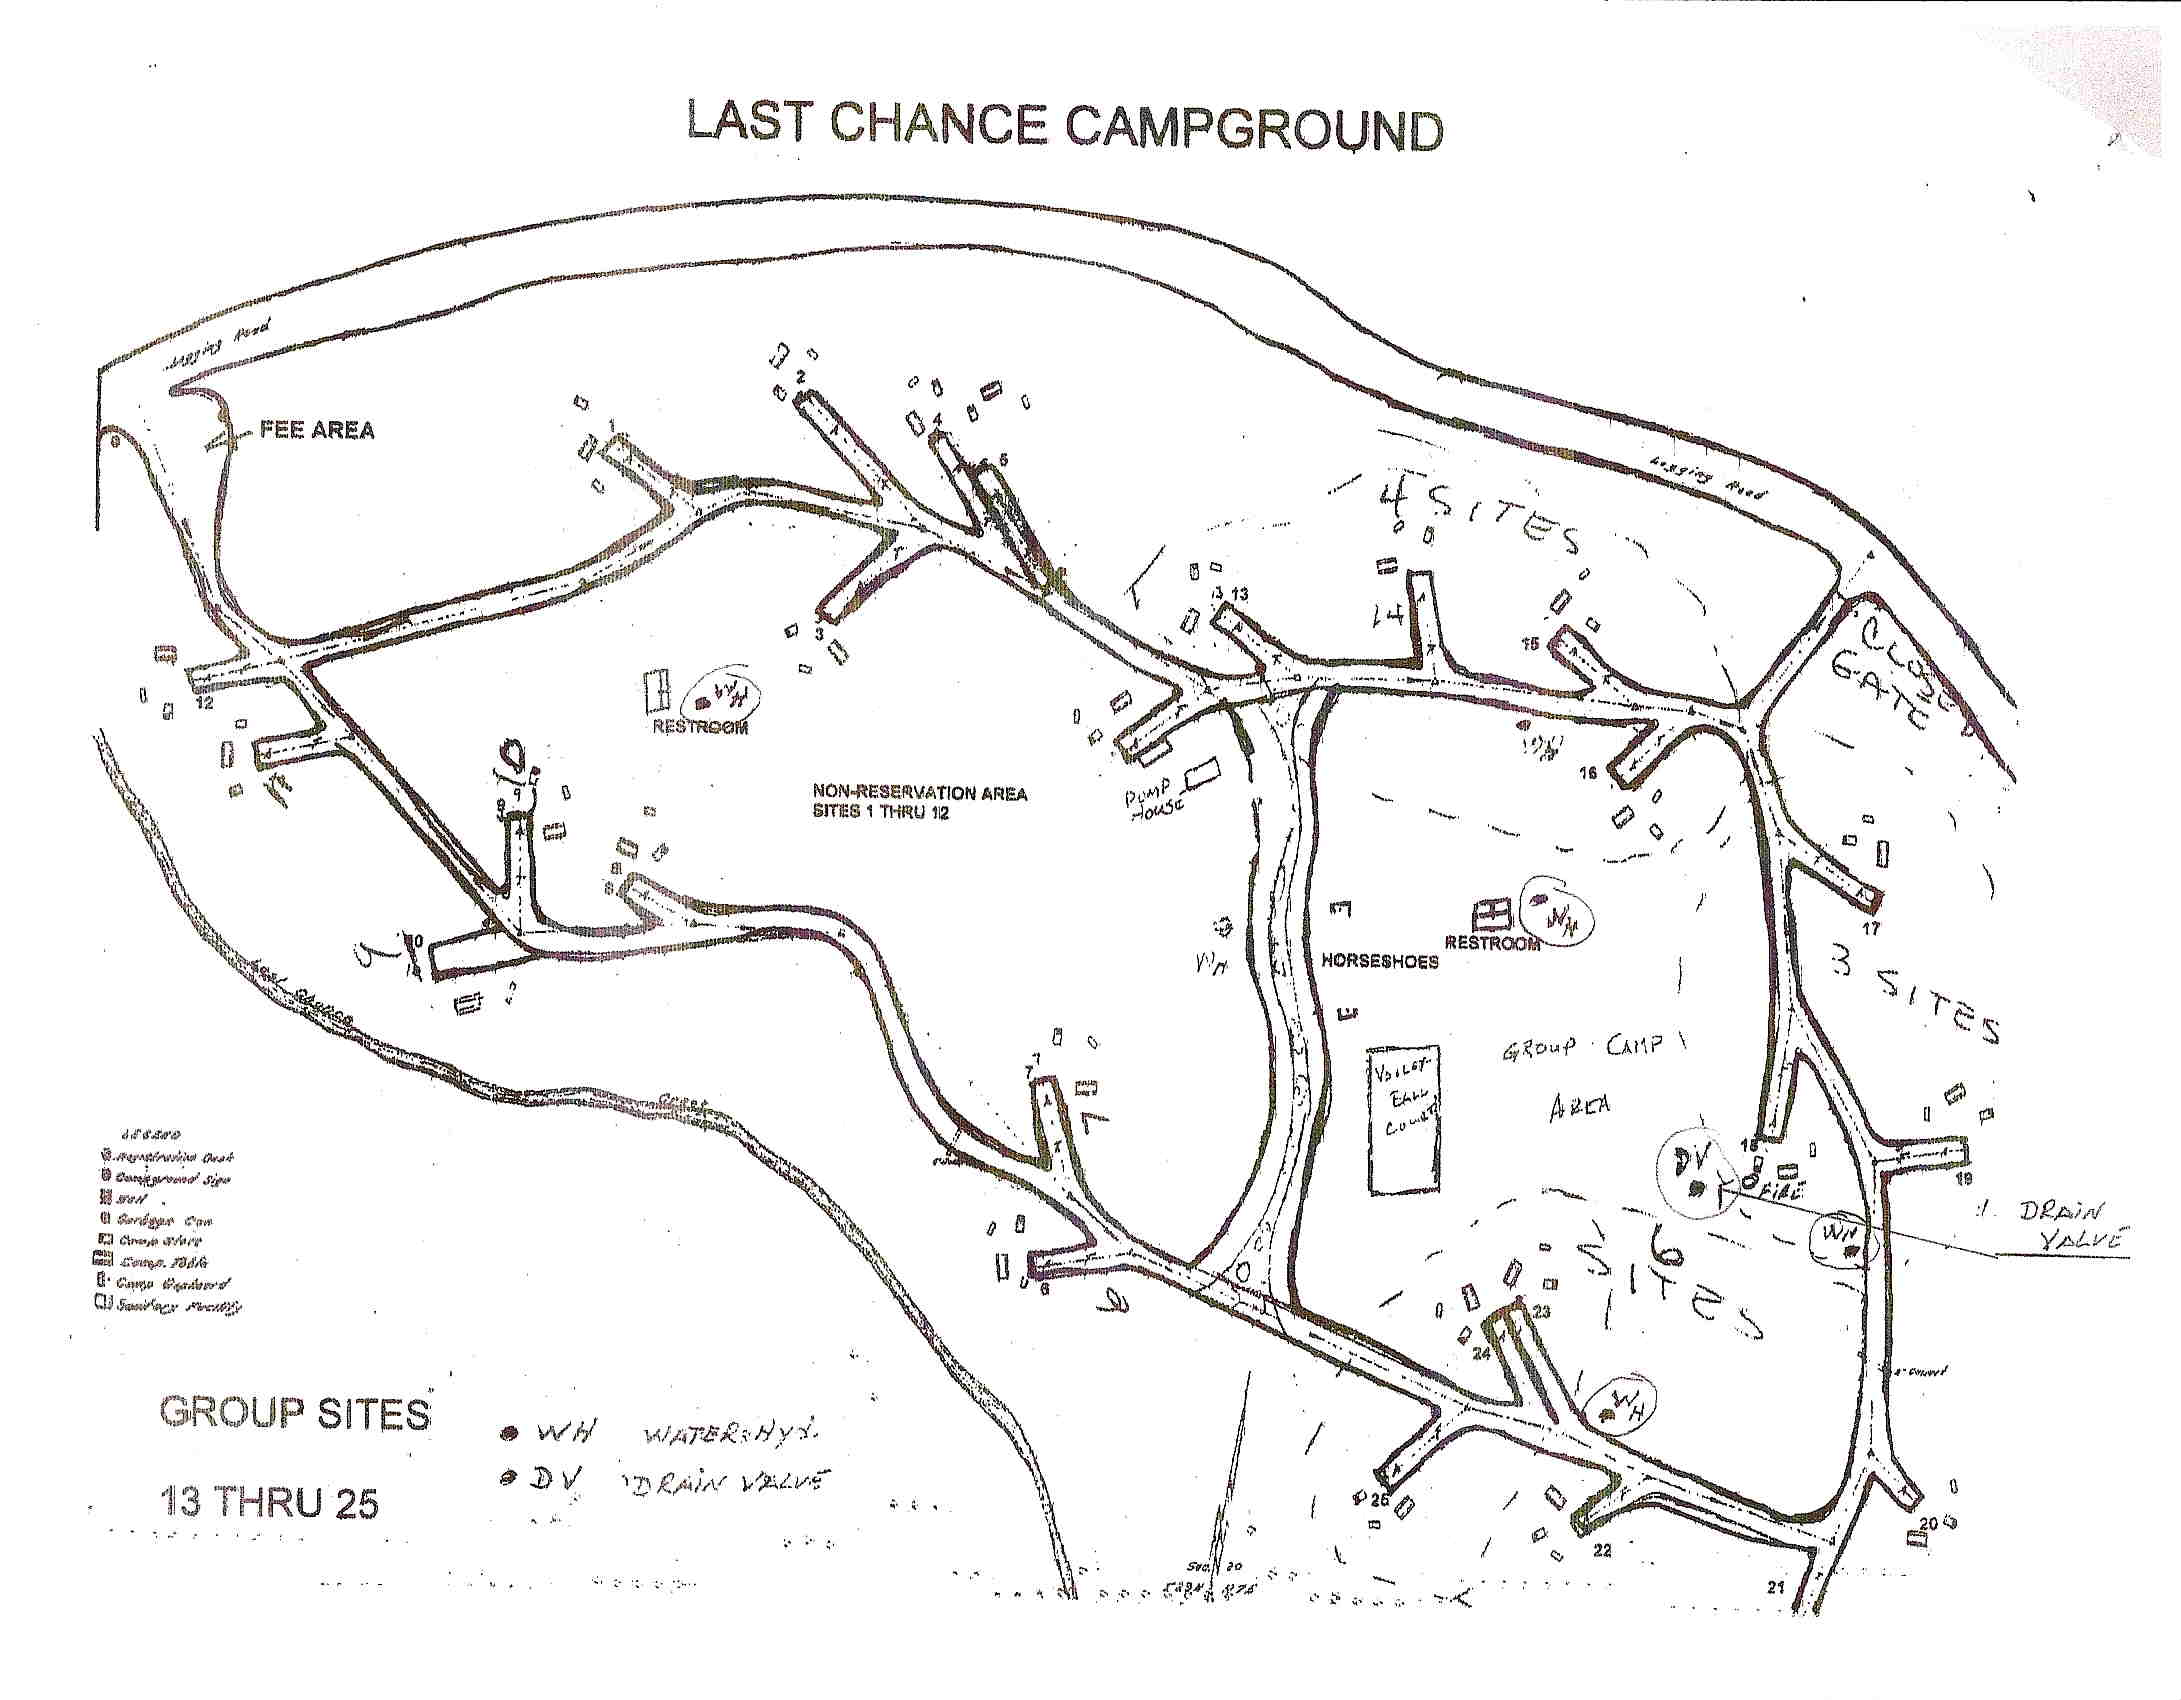 right-click to view and print map